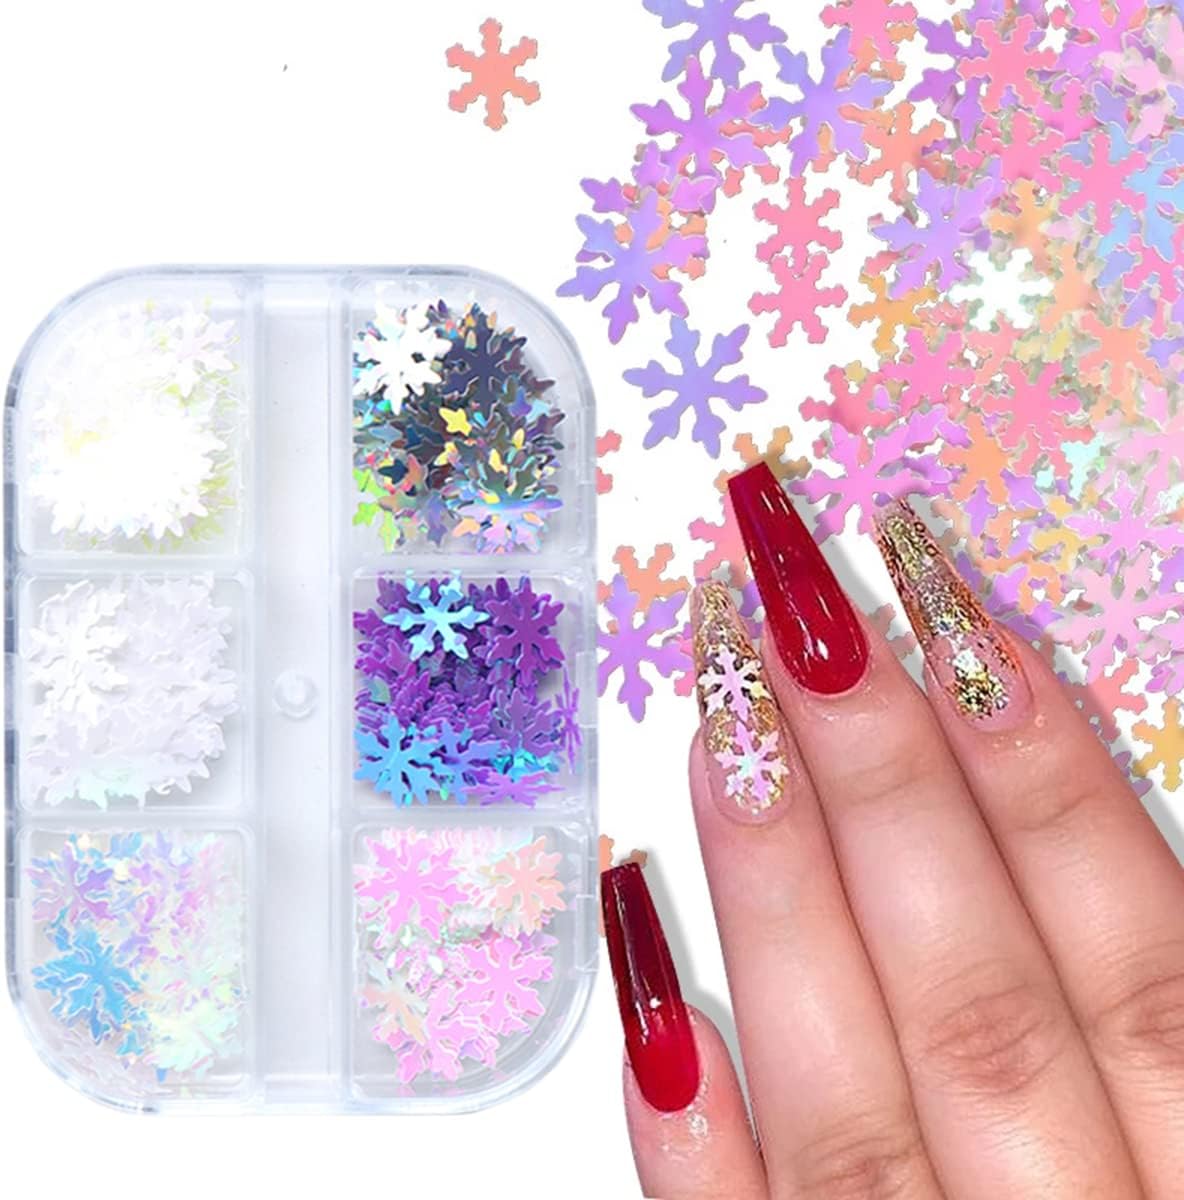 6 Grids of Holographic Sequins - 1909-27 - #27 Snowflakes